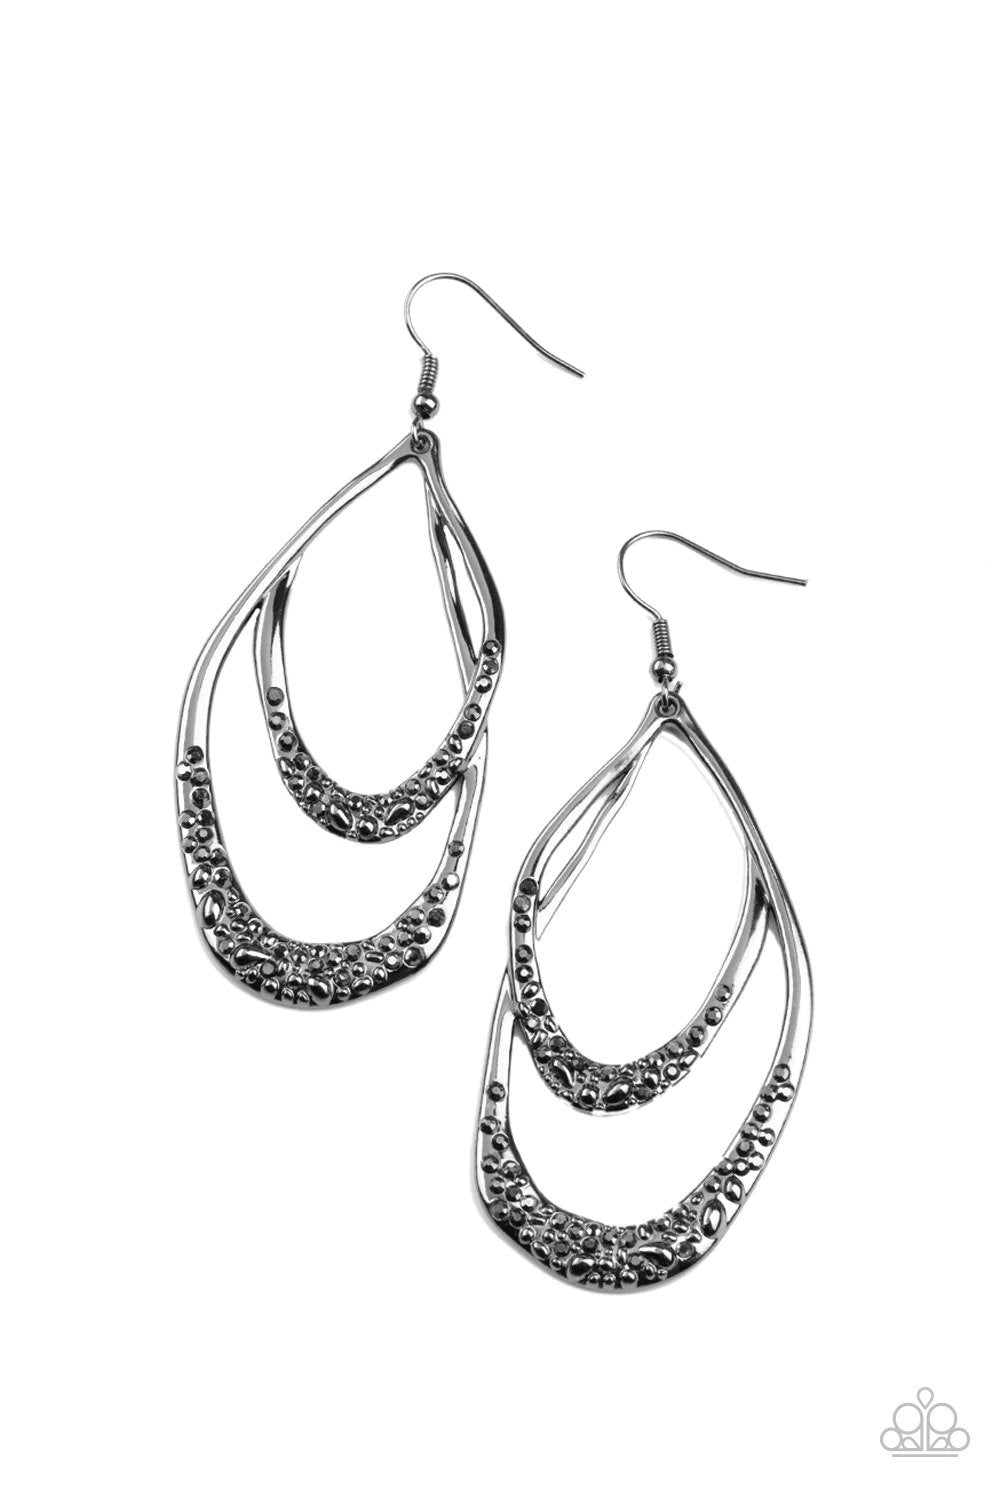 Beyond Your GLEAMS Black Earrings - Paparazzi Accessories- lightbox - CarasShop.com - $5 Jewelry by Cara Jewels